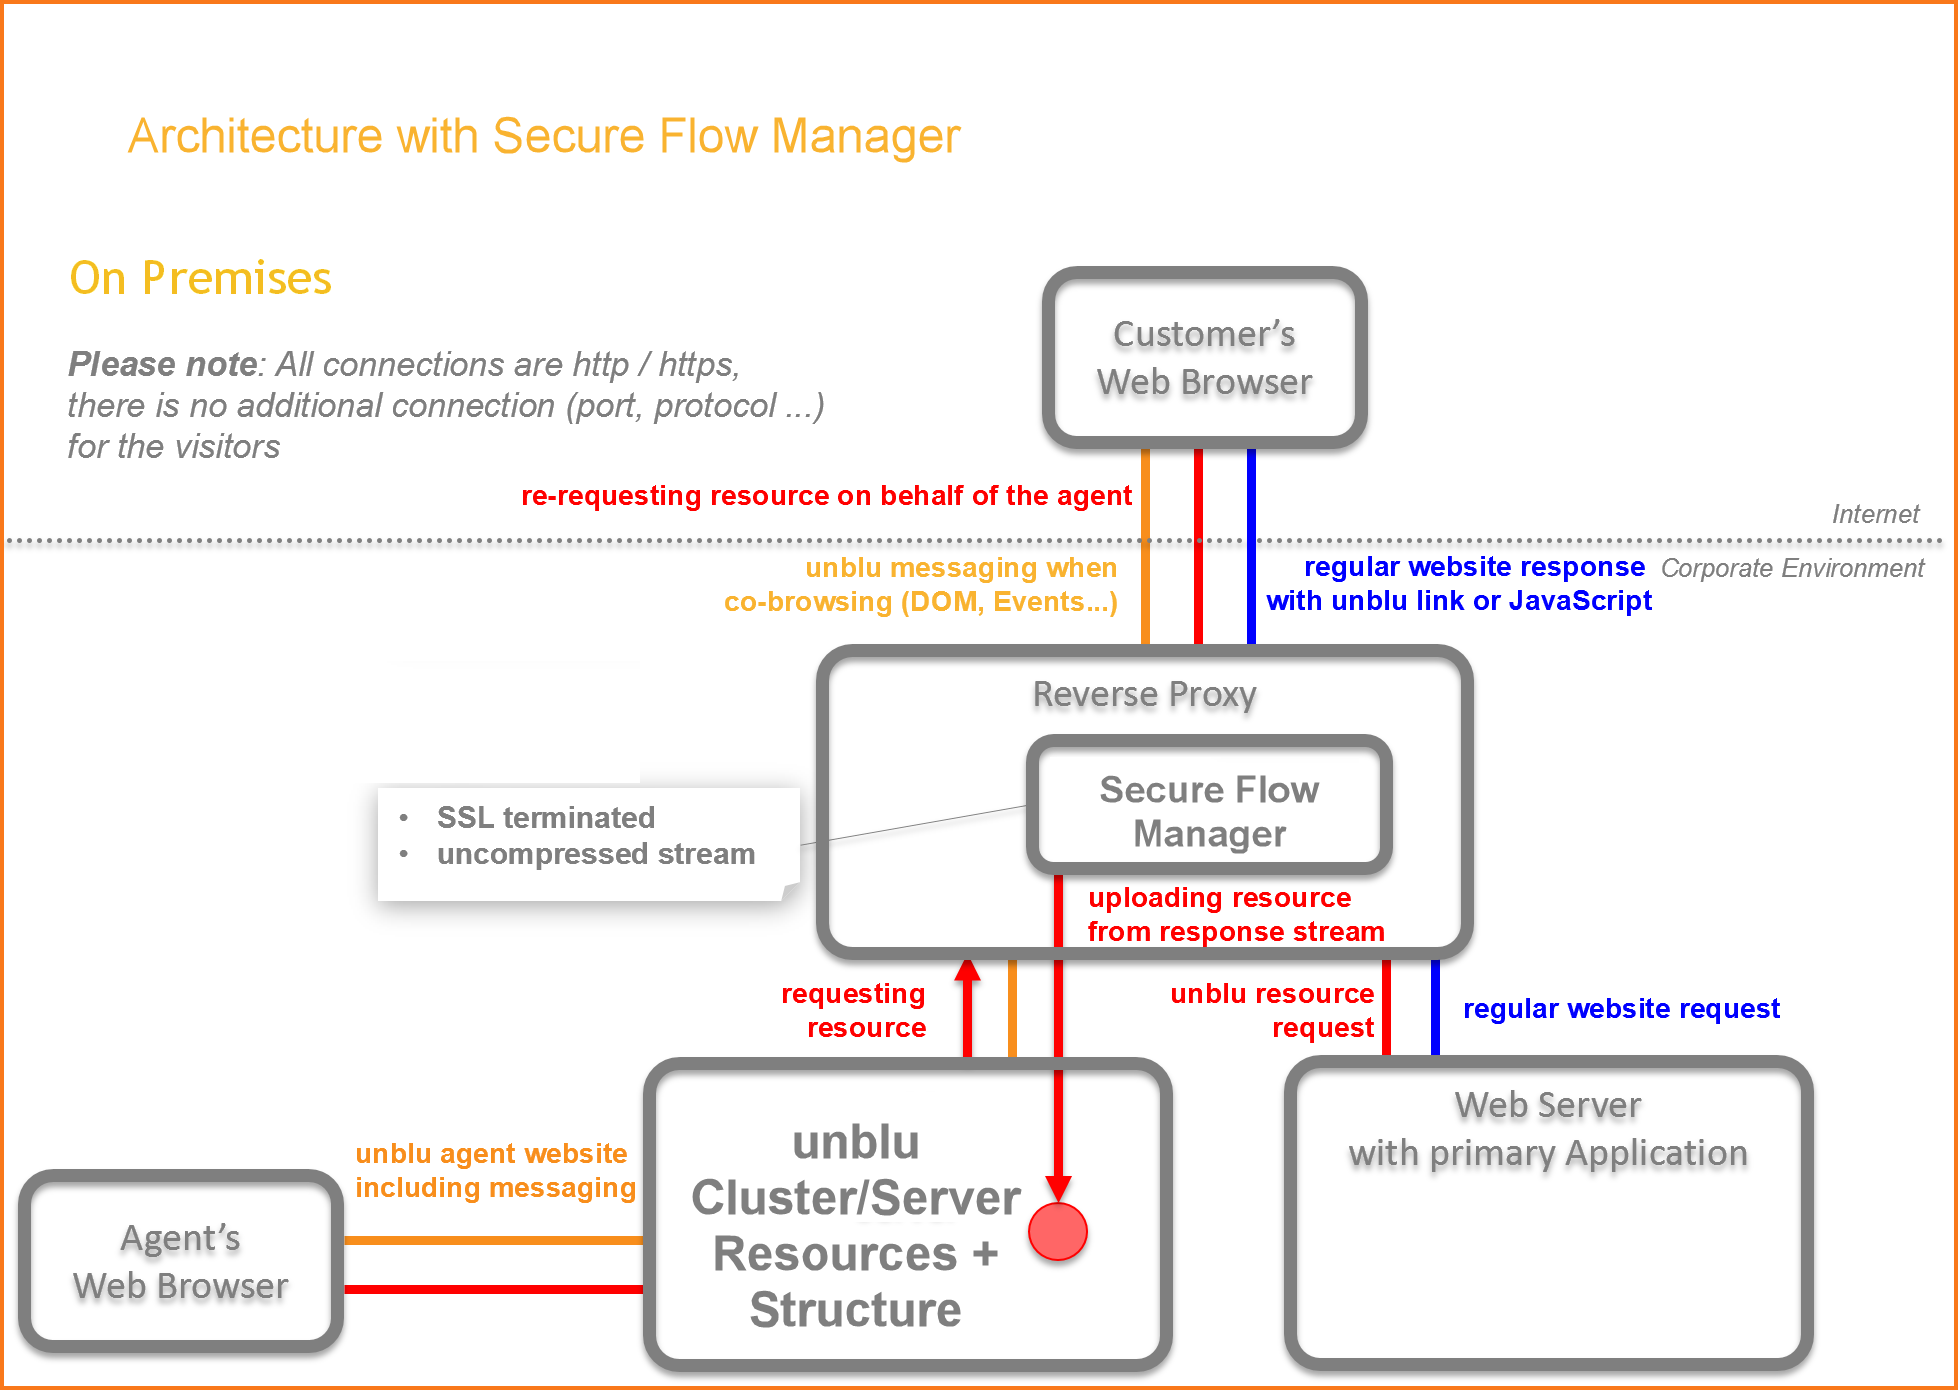 architecture-with-secure-flow-manager-05122018.png